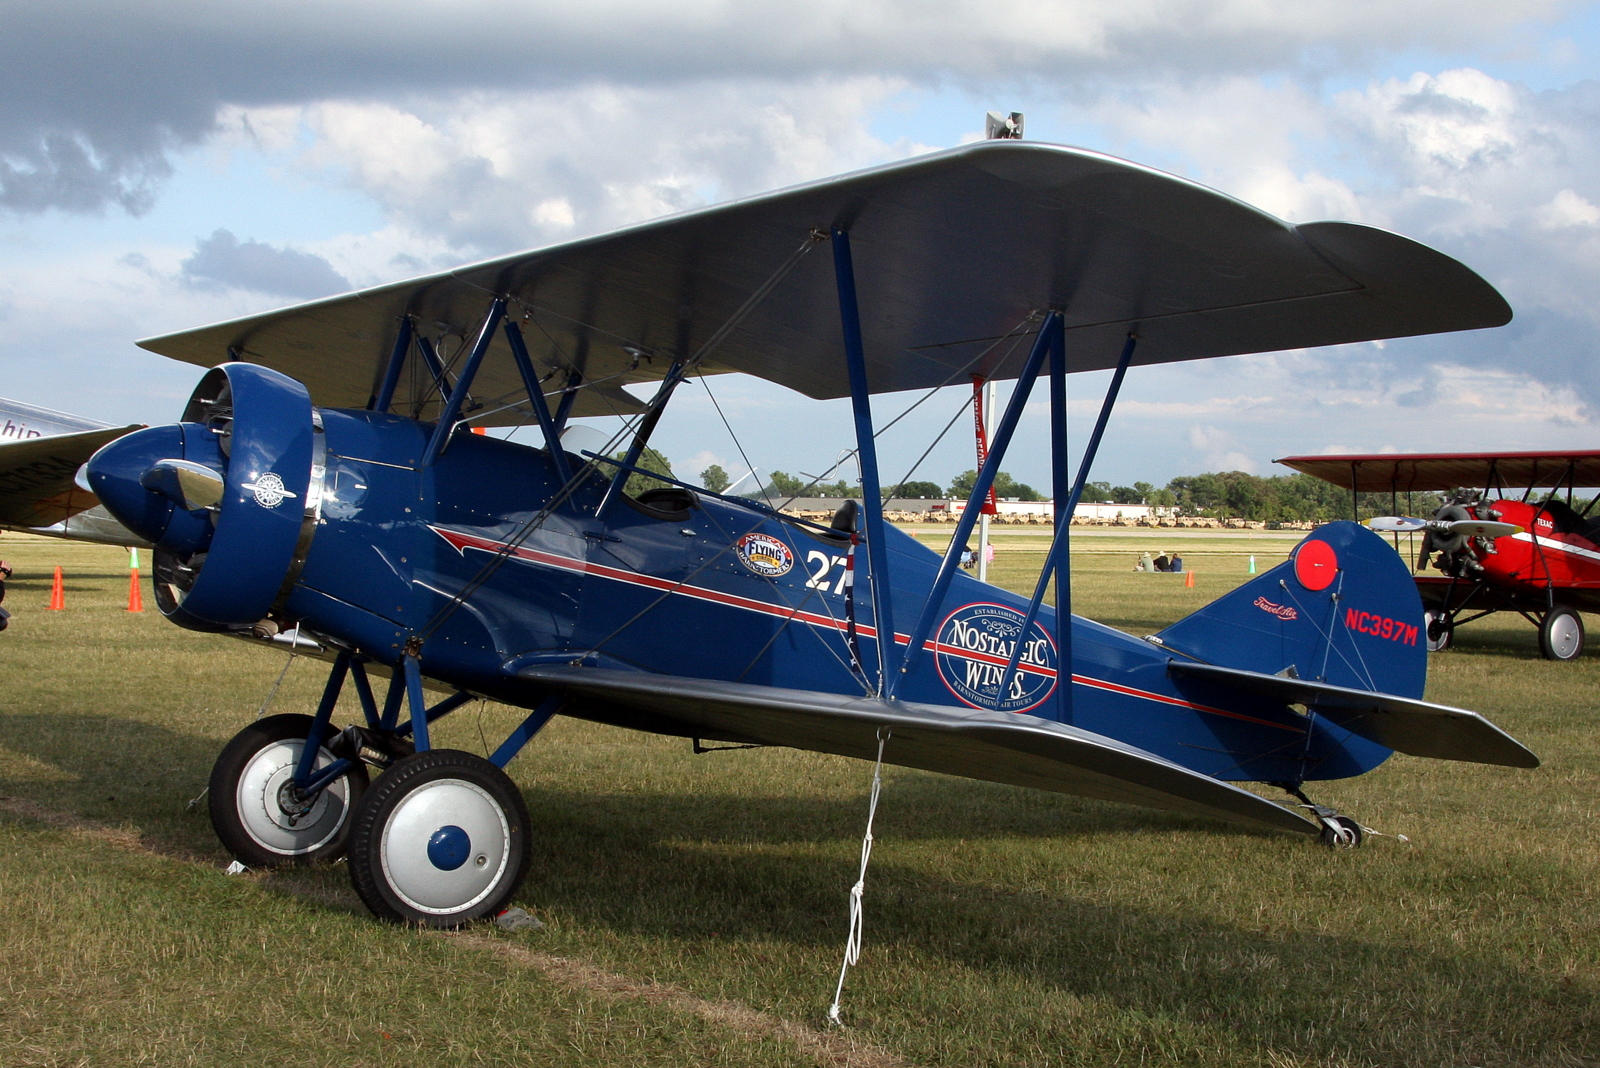 an old style blue plane on display in an open field